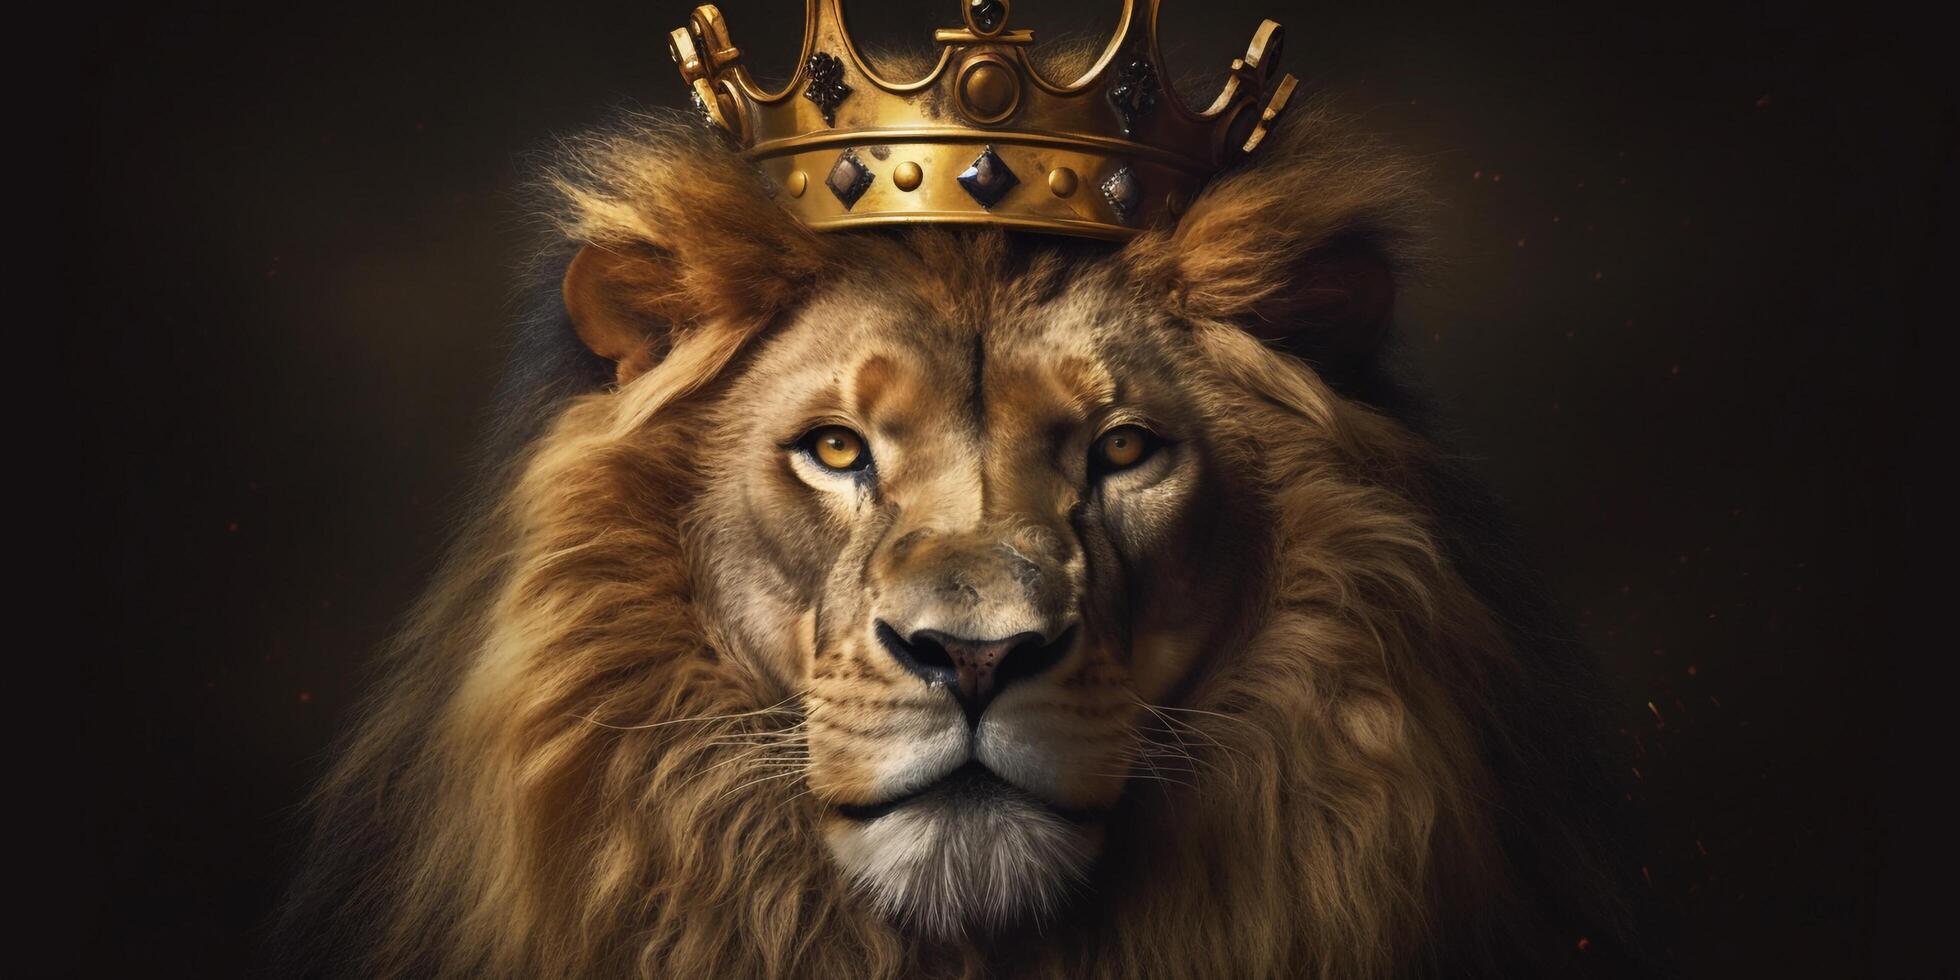 Lion king in a golden crown on a dark background with . photo